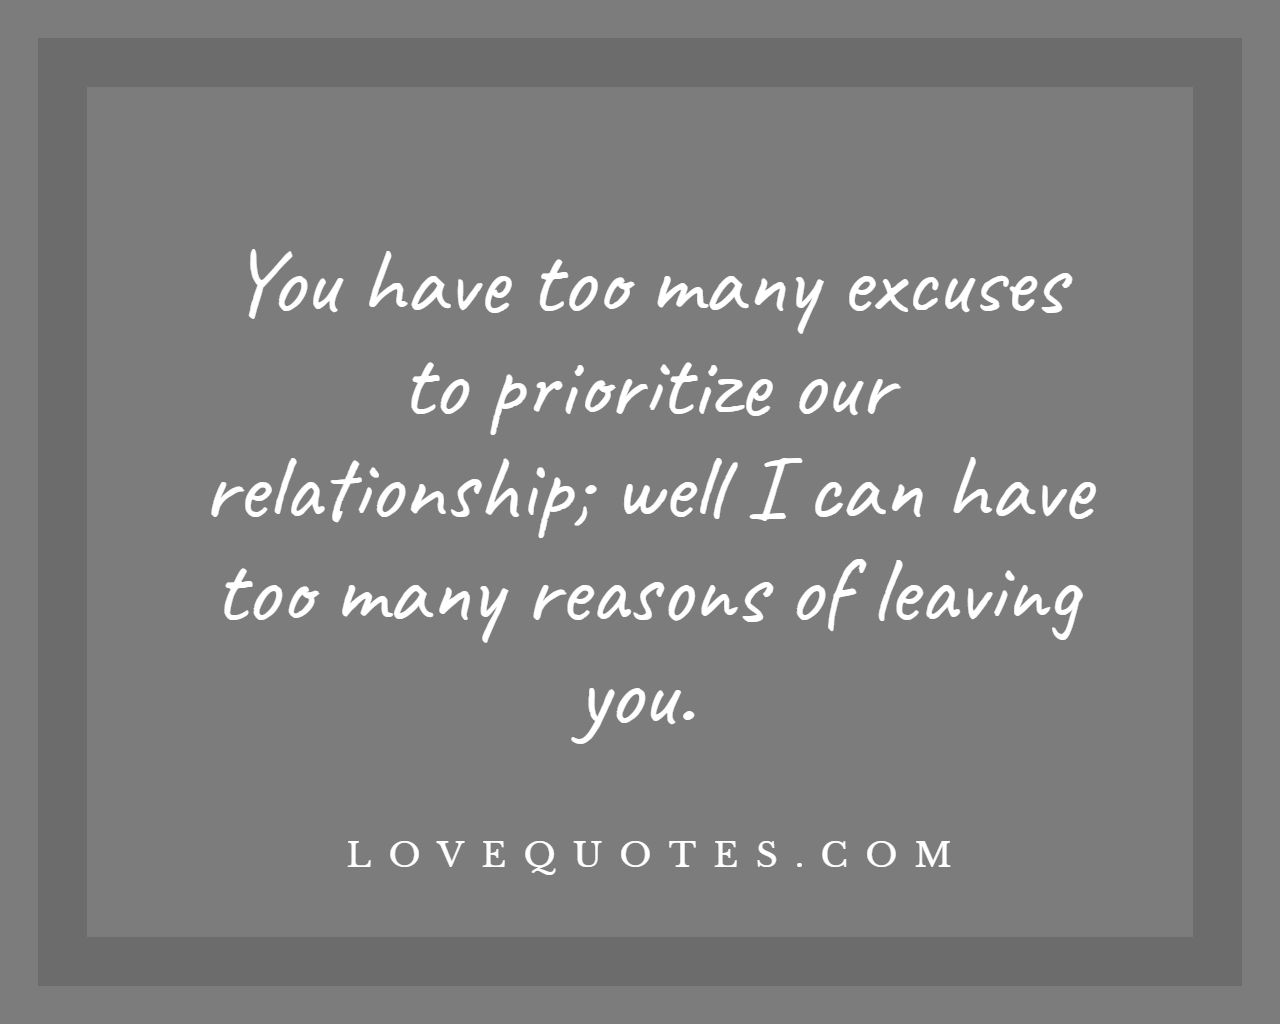 Reasons Of Leaving You